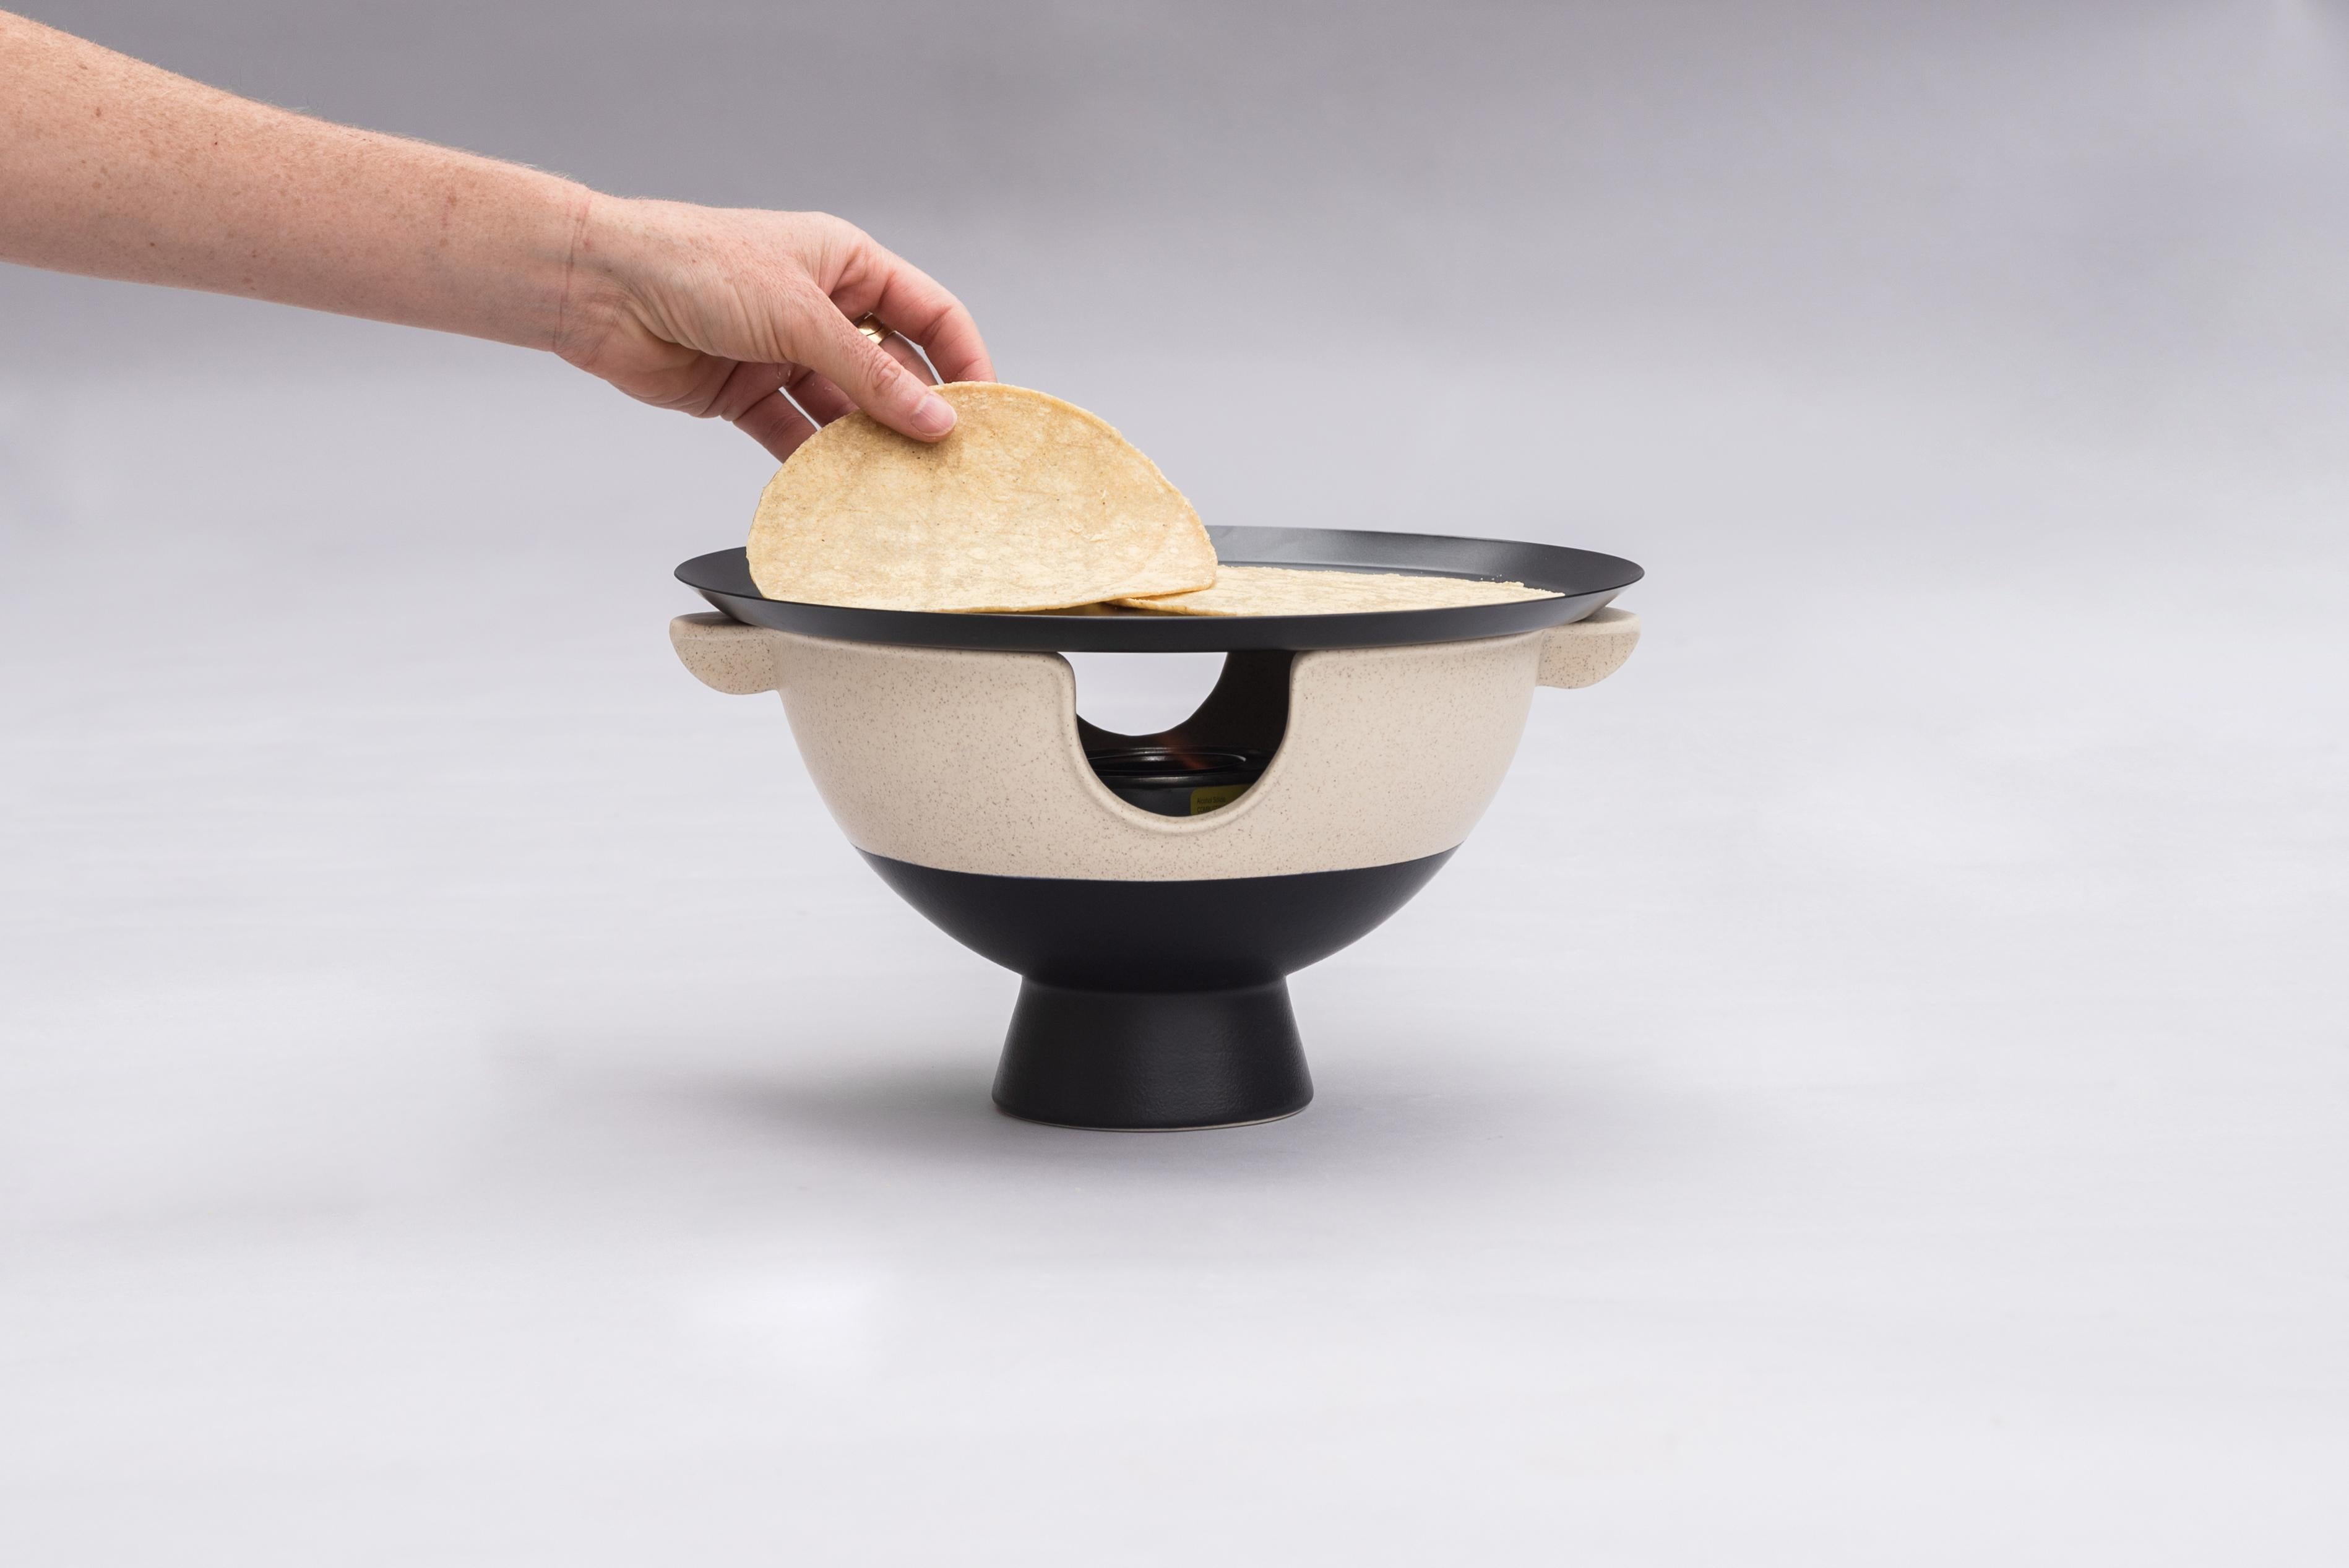 An anafre is a very common utilitarian object in Mexico. The use of anafres is mainly to heat tortillas, a very important element in our gastronomy. We wanted to honor this functional object that is used on a daily basis in Mexico and bring it to